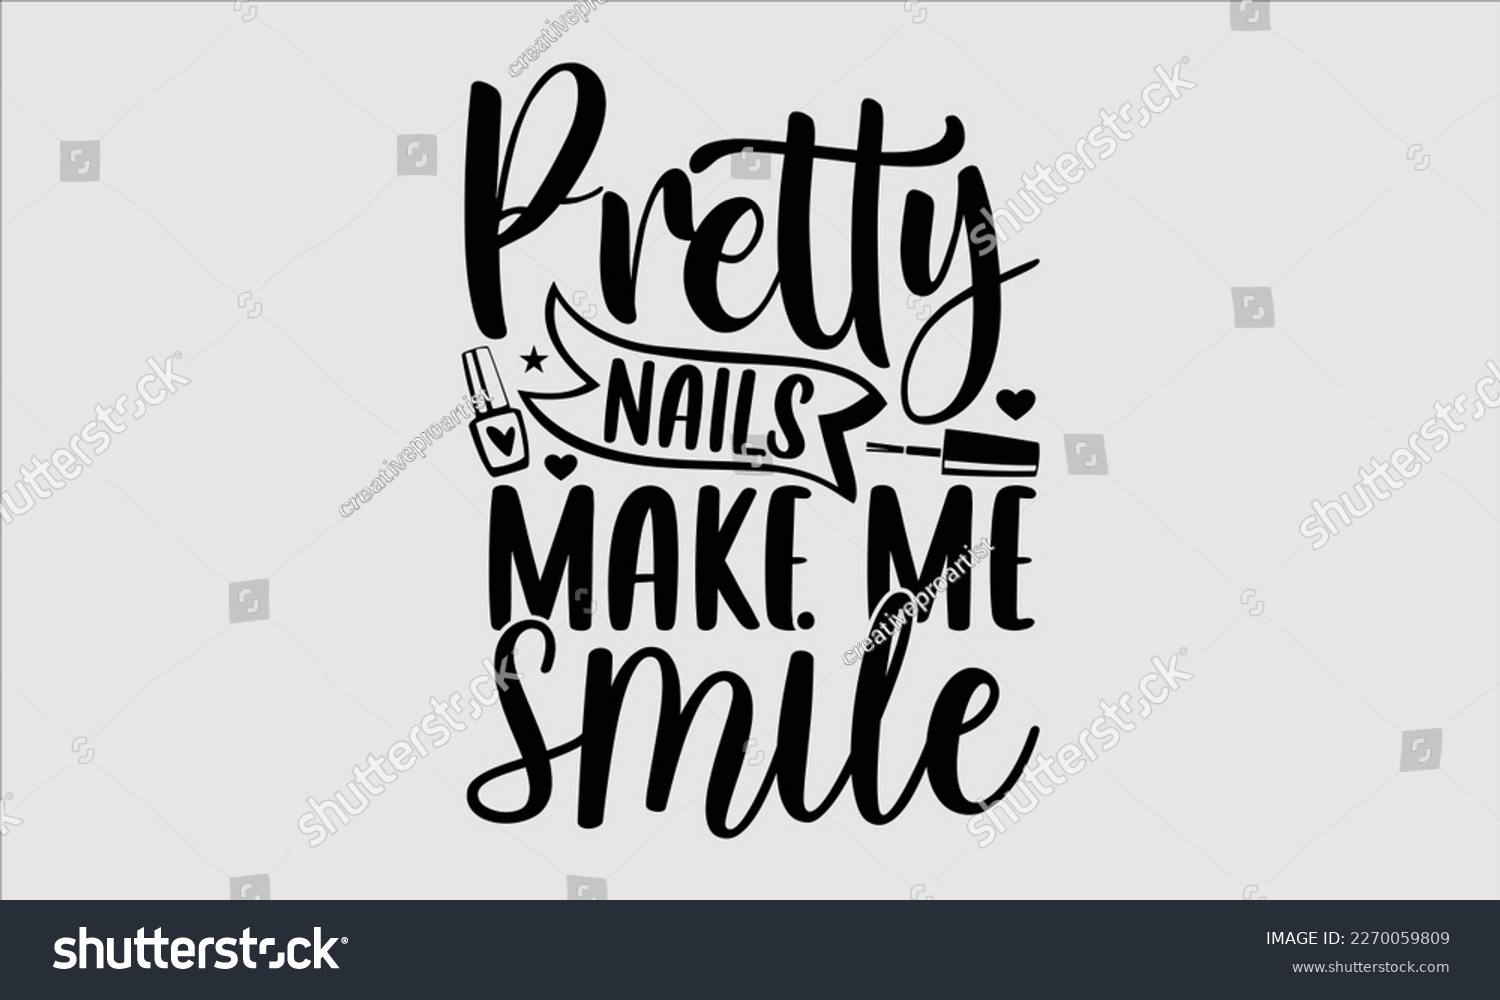 SVG of Pretty nails make me smile- Nail Tech t shirts design, Hand written lettering phrase, Isolated on white background,  Calligraphy graphic for Cutting Machine, svg eps 10. svg